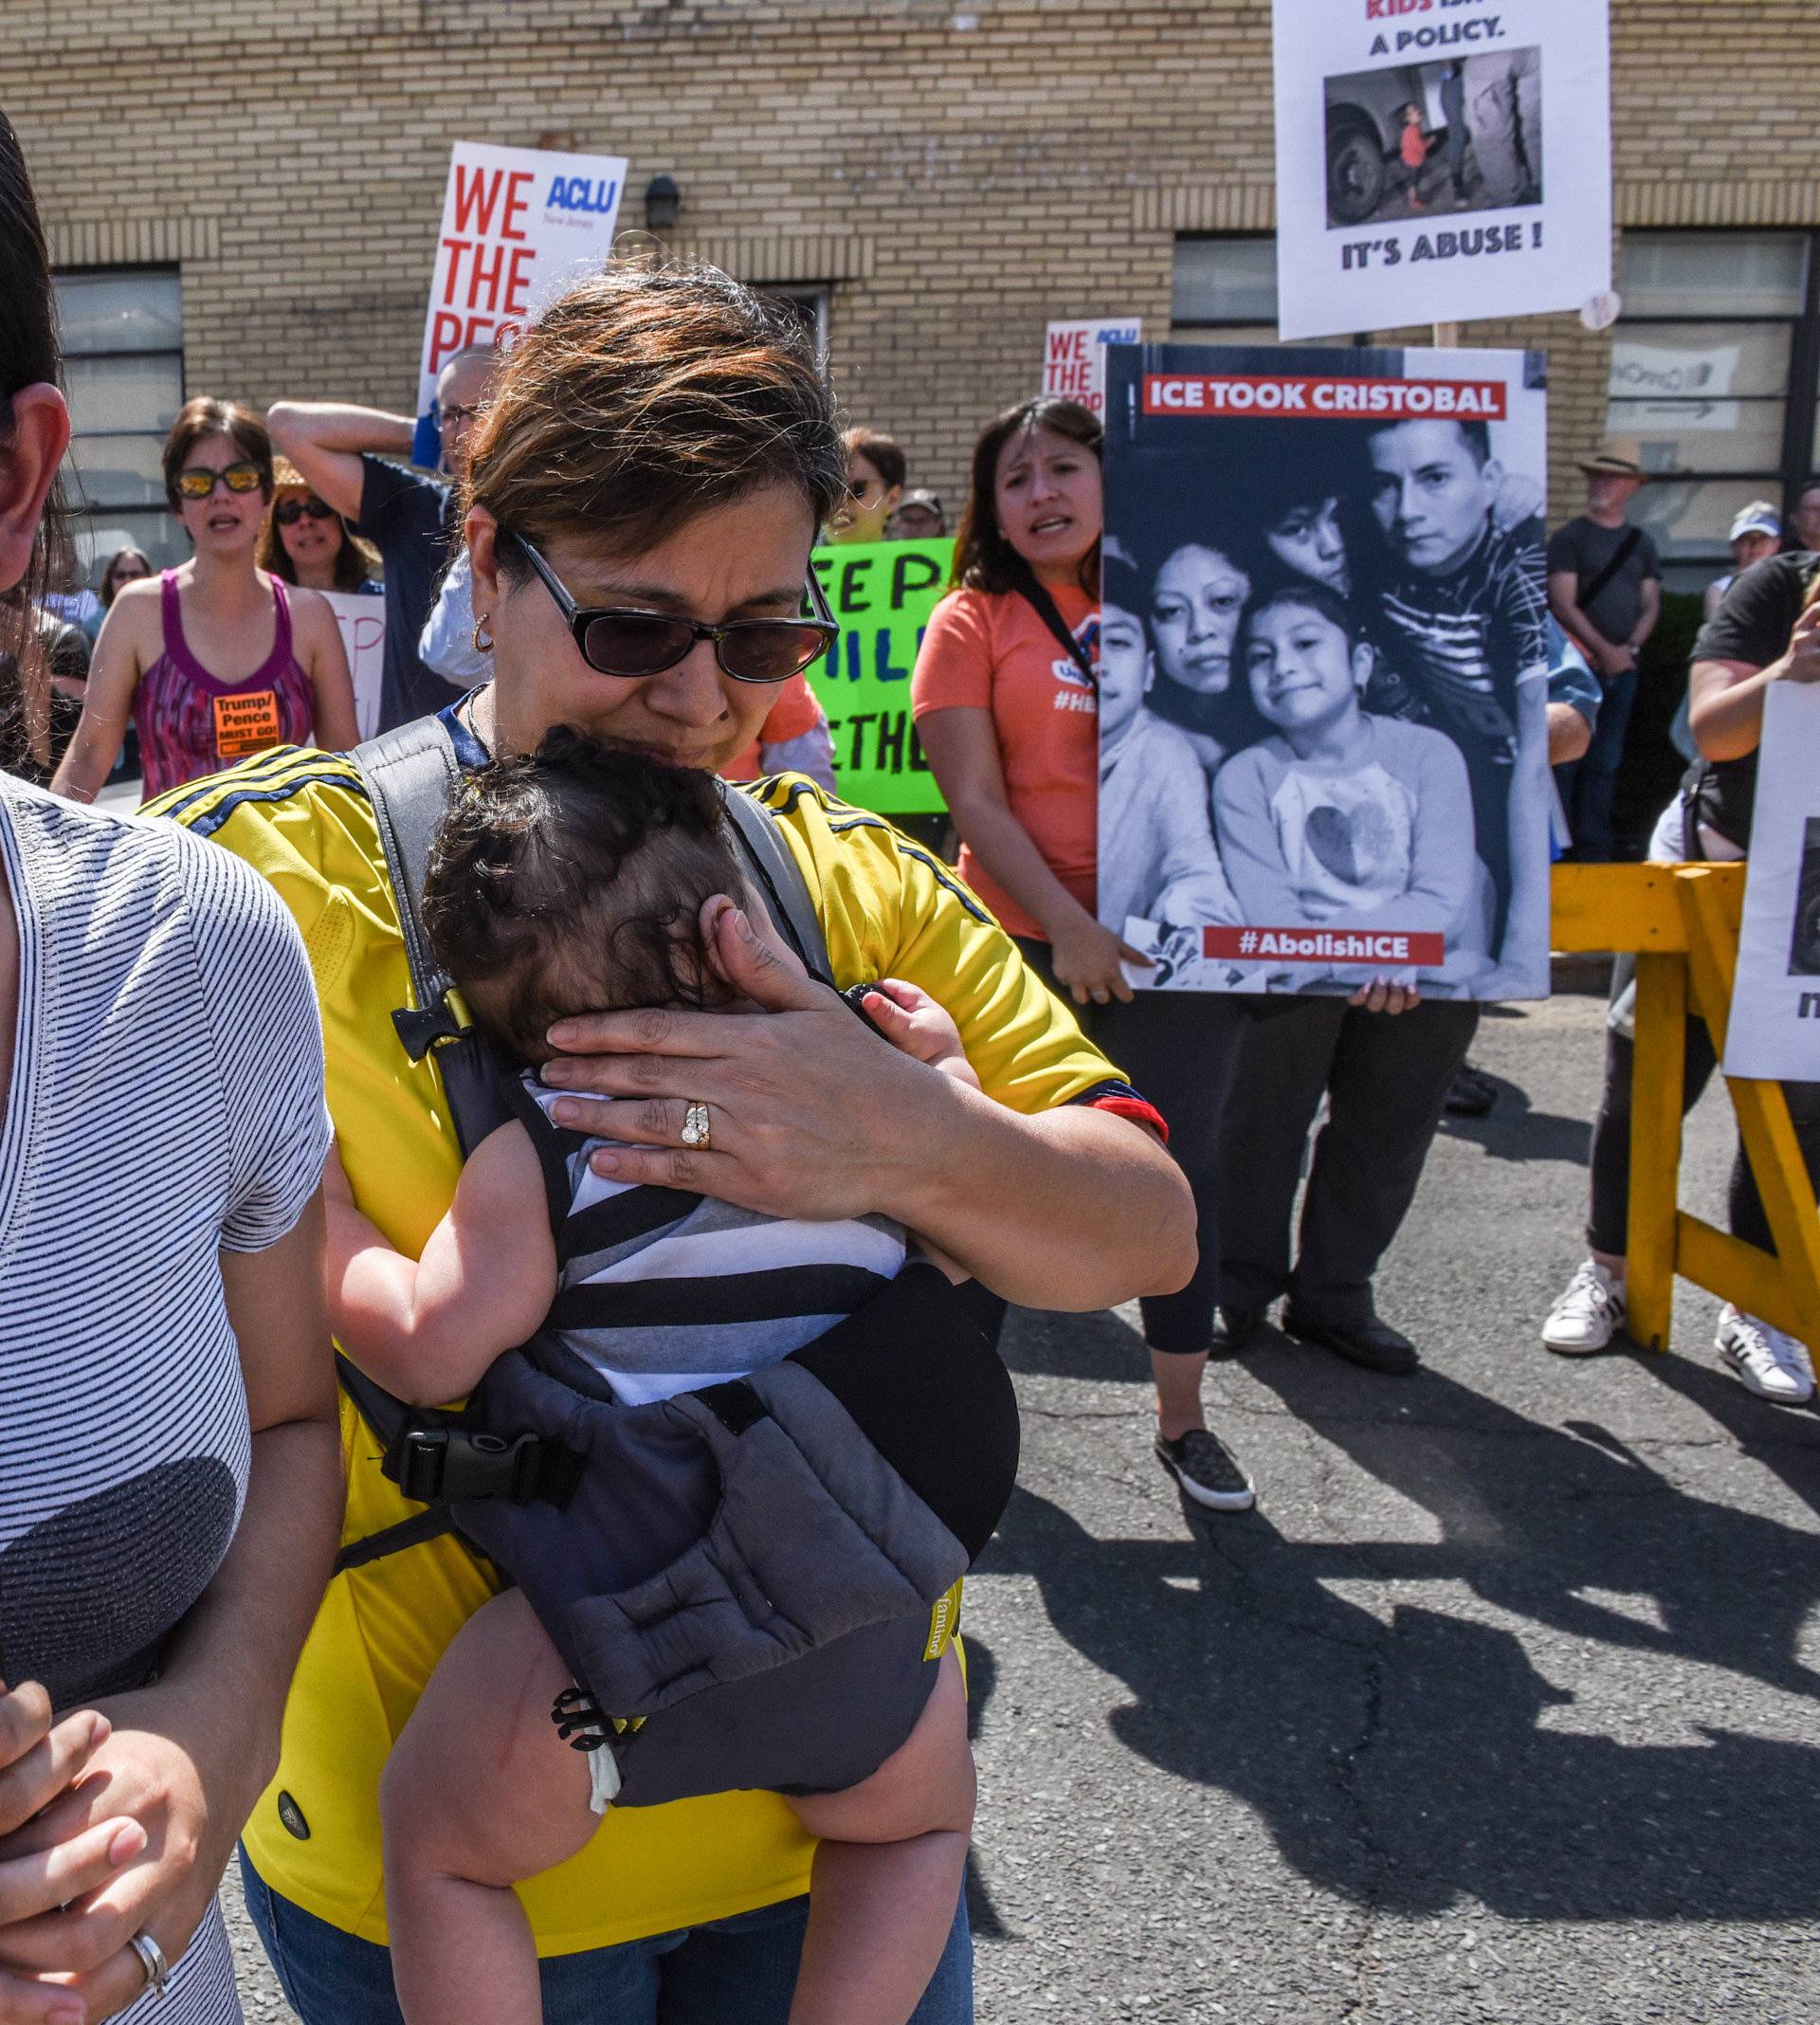 People participate in a protest against recent U.S. immigration policy that separates children from their families when entering the United States as undocumented immigrants in front of a Homeland Security facility in Elizabeth